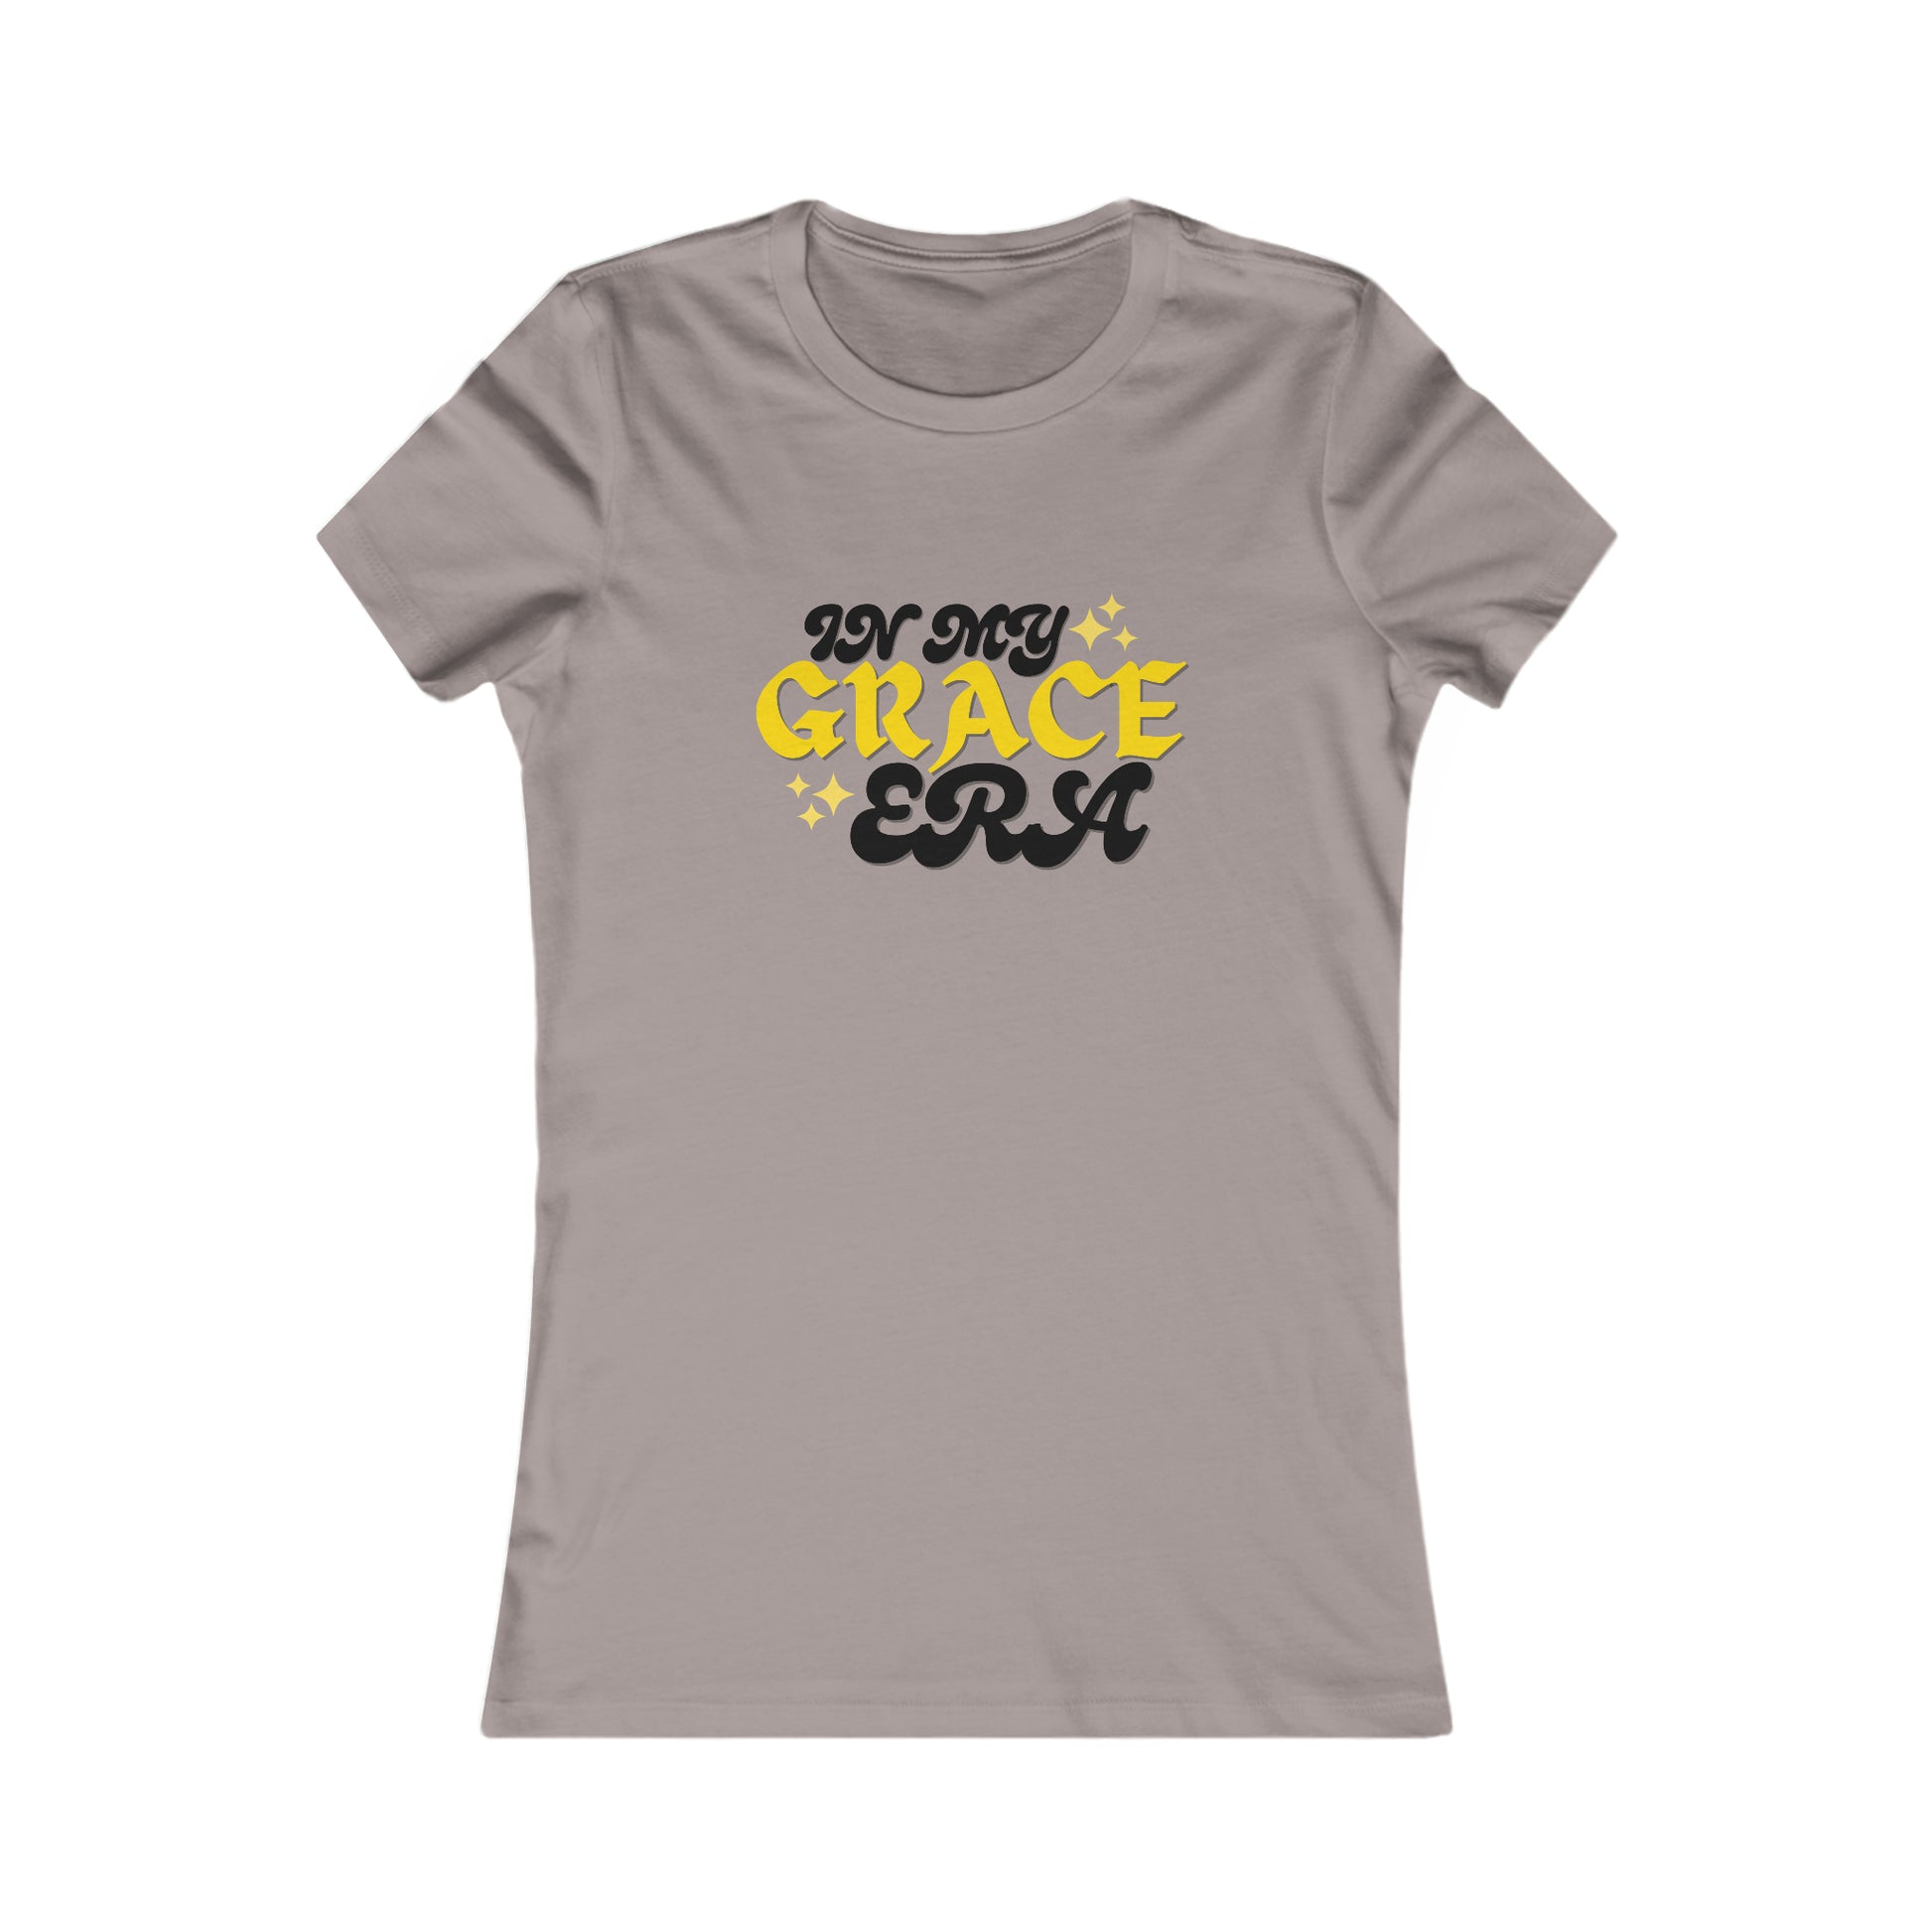 In My Grace Era - Women's High Quality Soft Blend Inspirational, EMPWRHER-Based Fashion Tee, ERA Collection, Women's Favorite Tees Printify